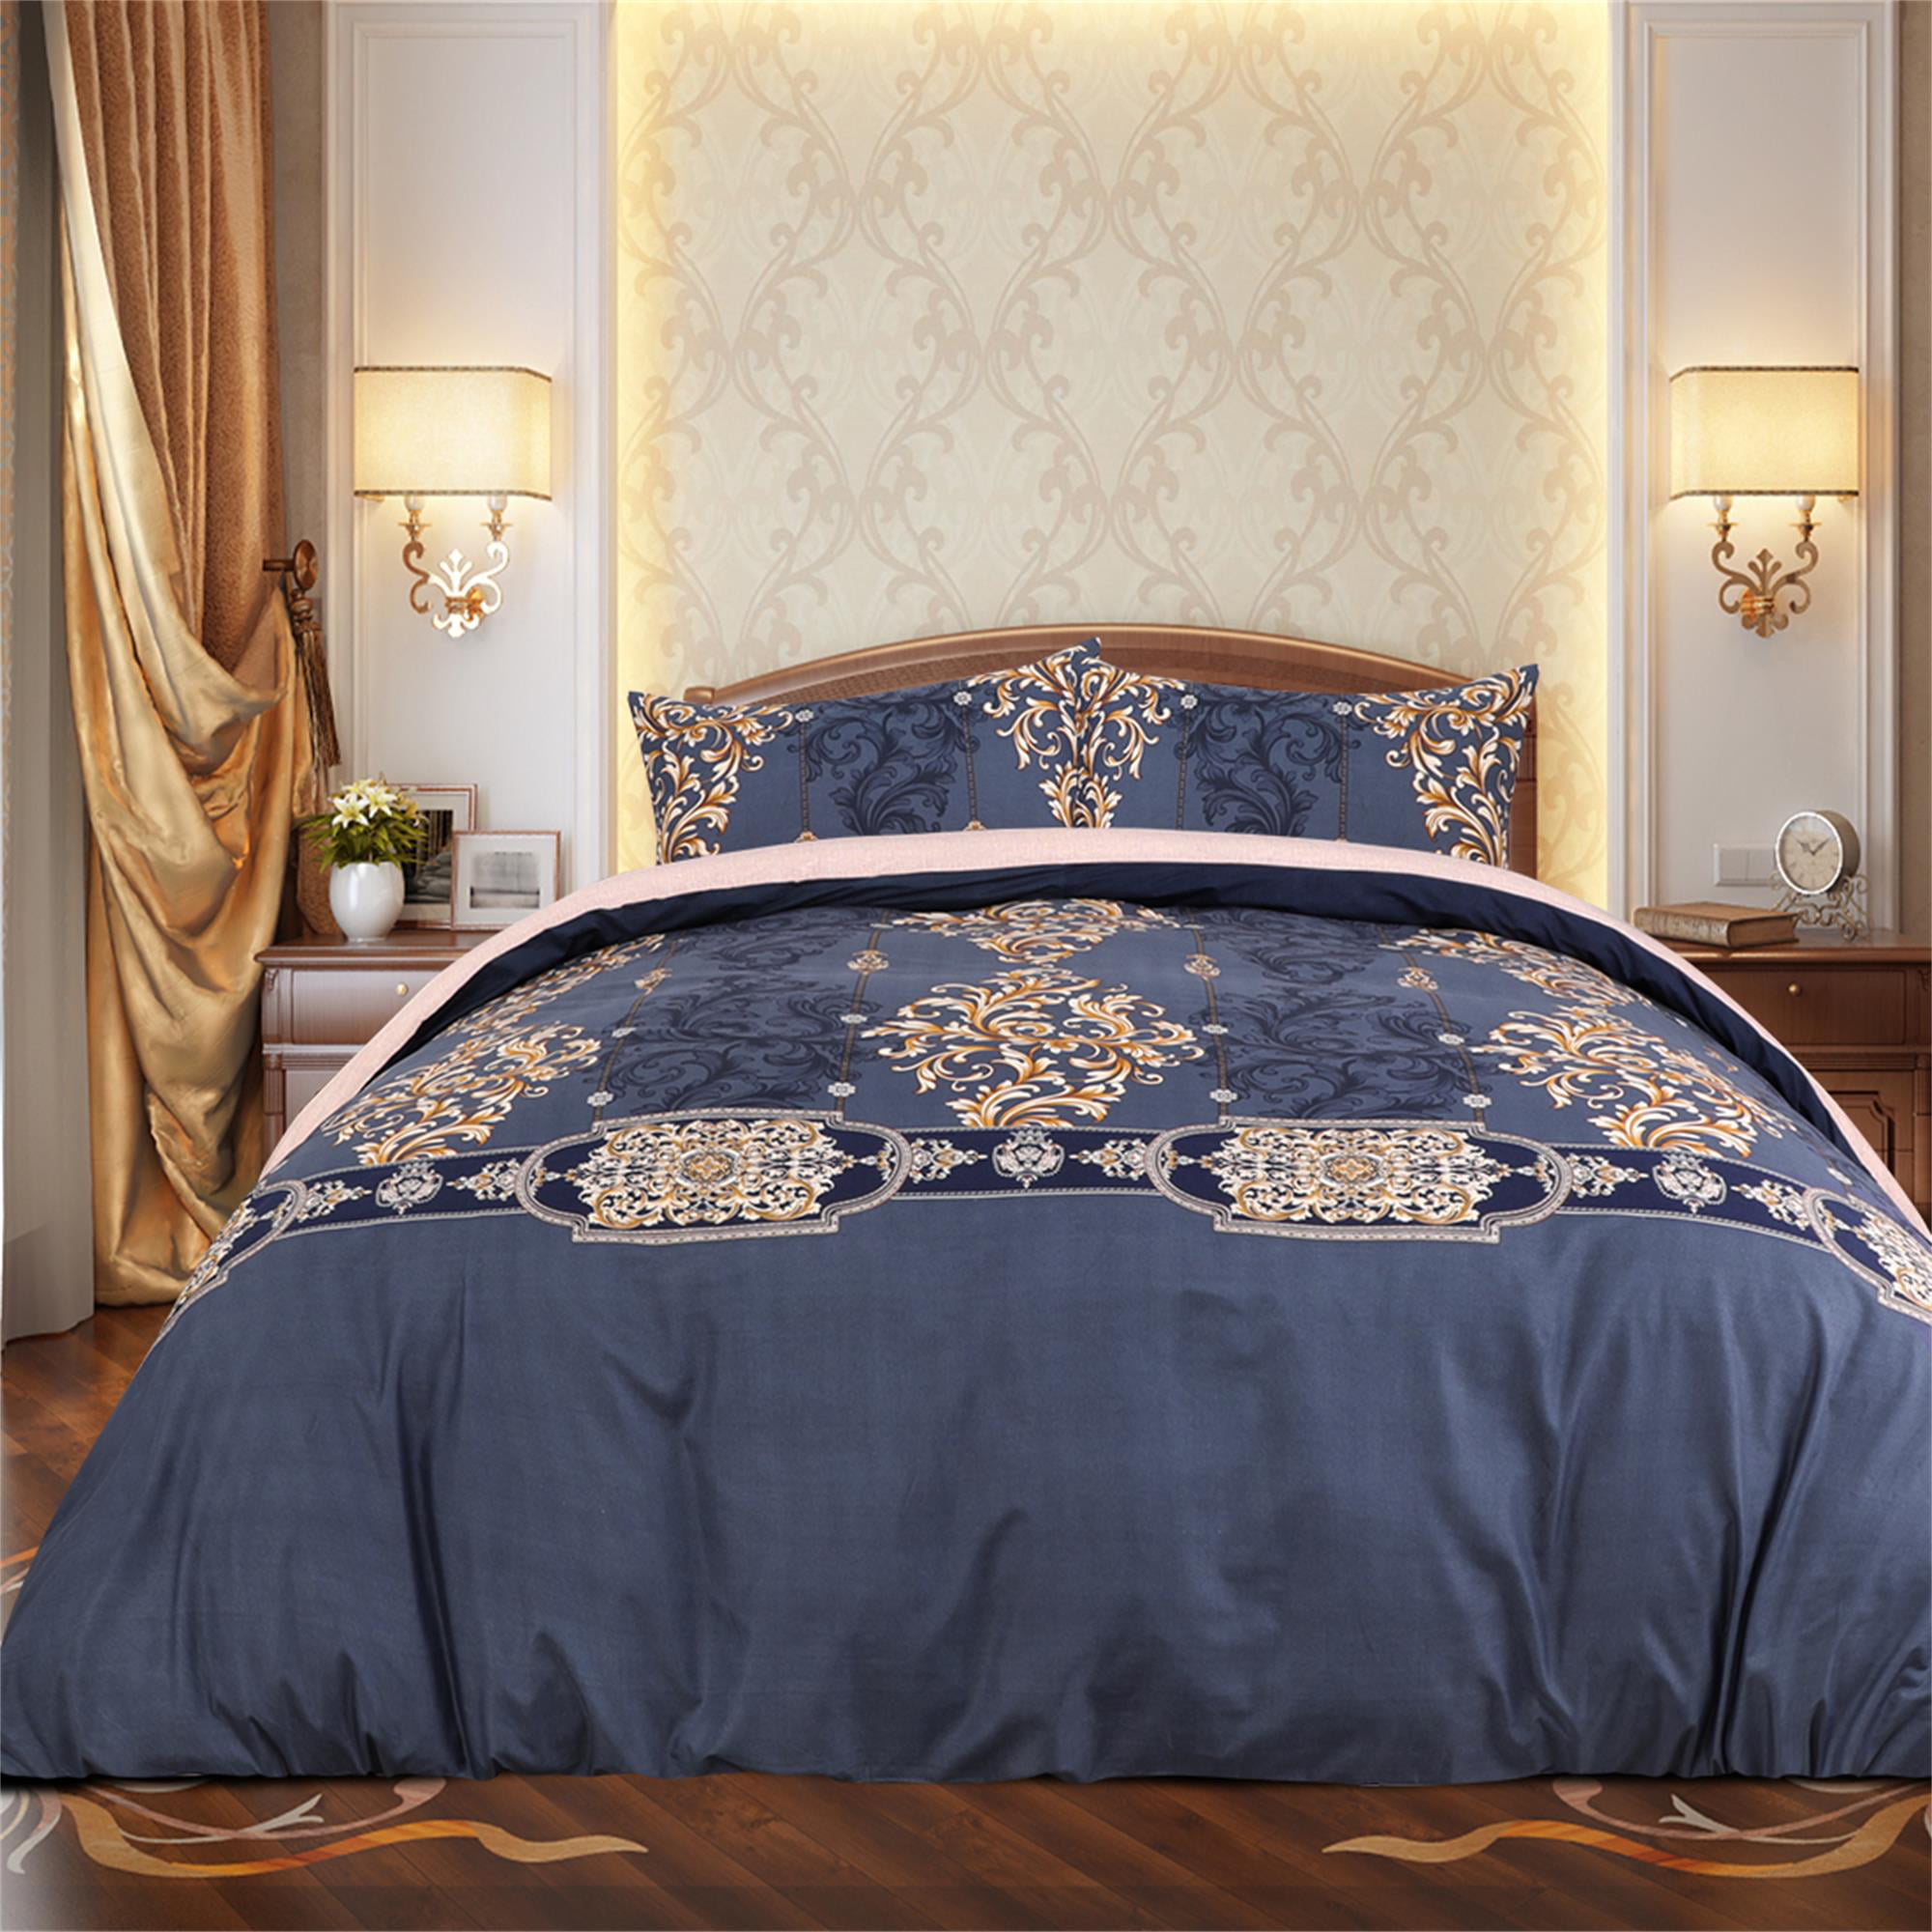 Details about   Better Homes & Gardens 5-PC KING Comforter SET With 2 PILLOWS IKAT SCROLL-WORK 